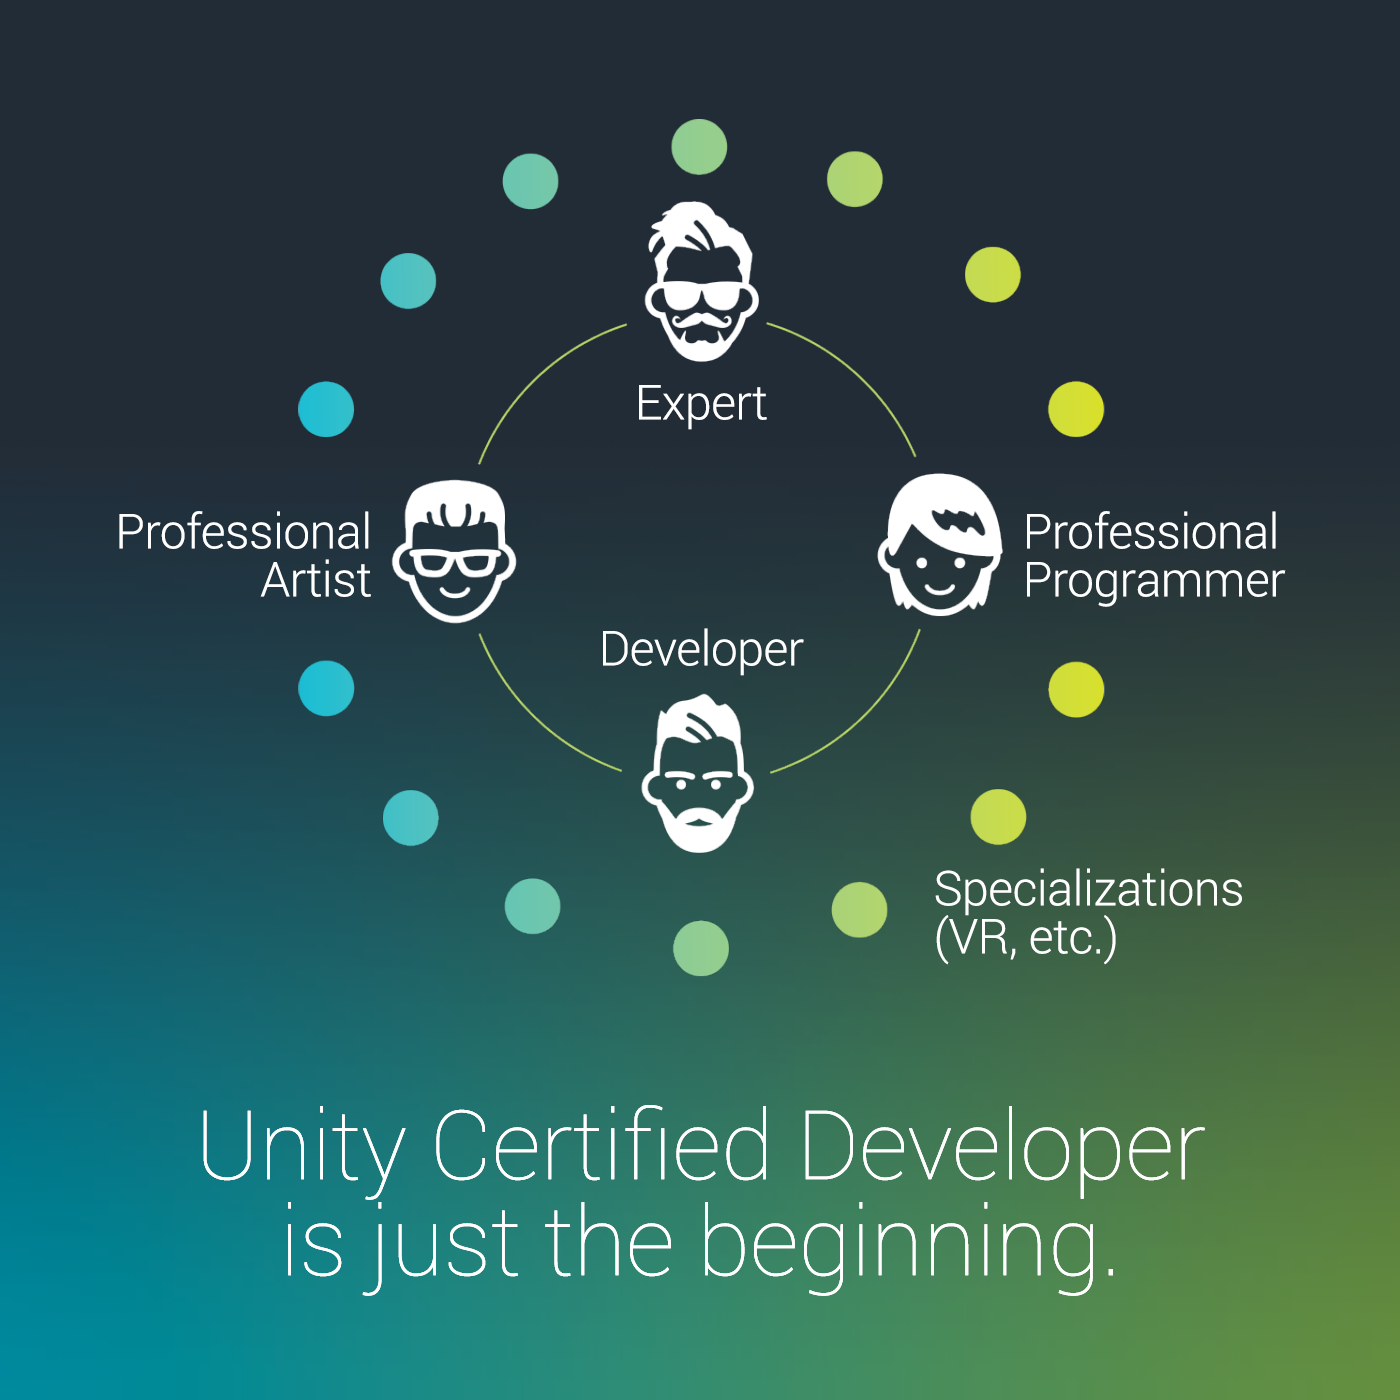 Future Levels of the Unity Certification Program